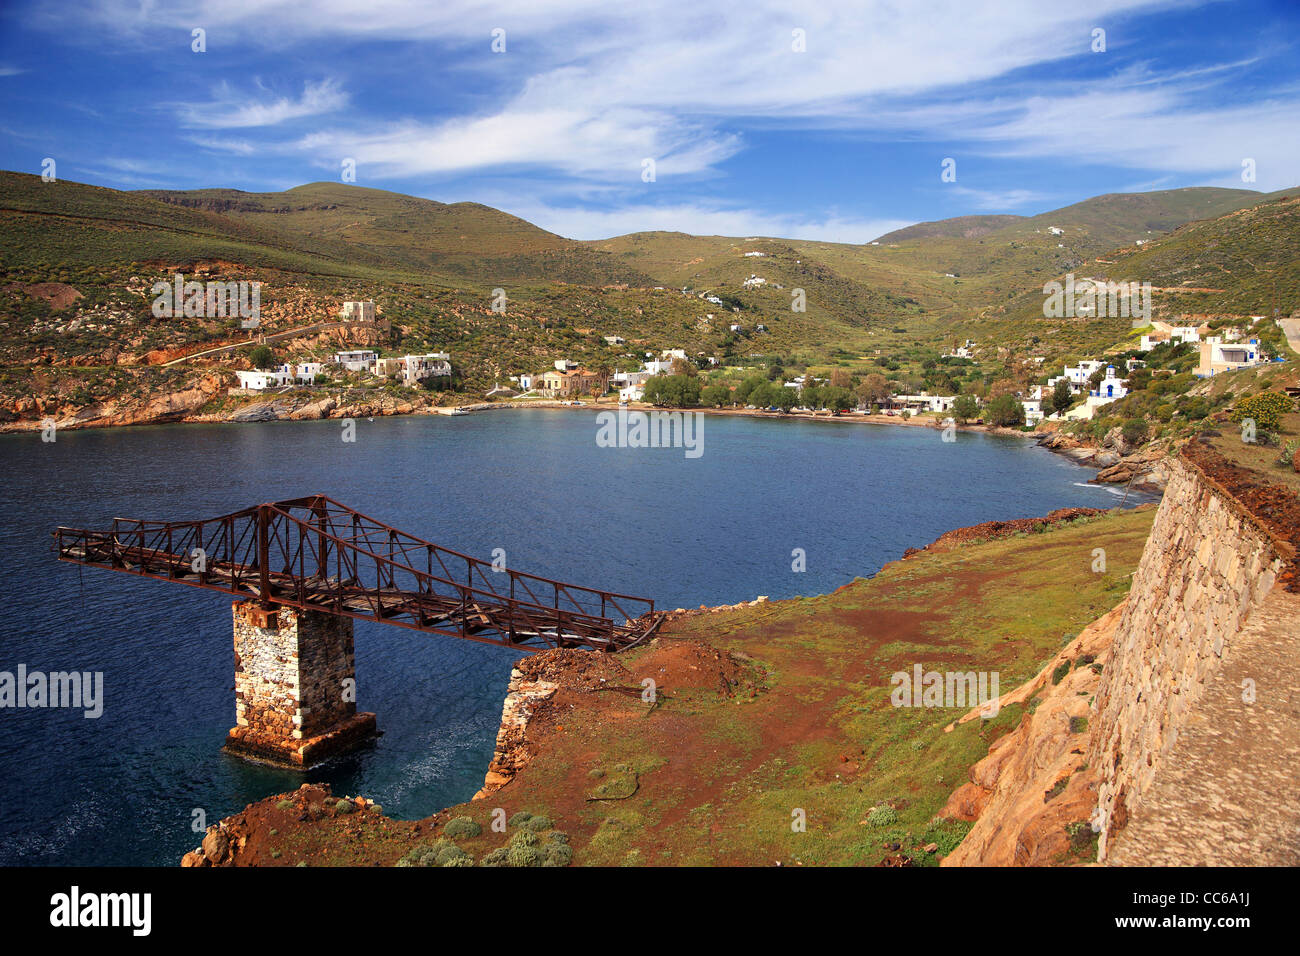 Greece, Serifos island, Mega Livadi village. An old, abandoned 'brigde' or 'ladder' used for loading minerals to ships. Stock Photo